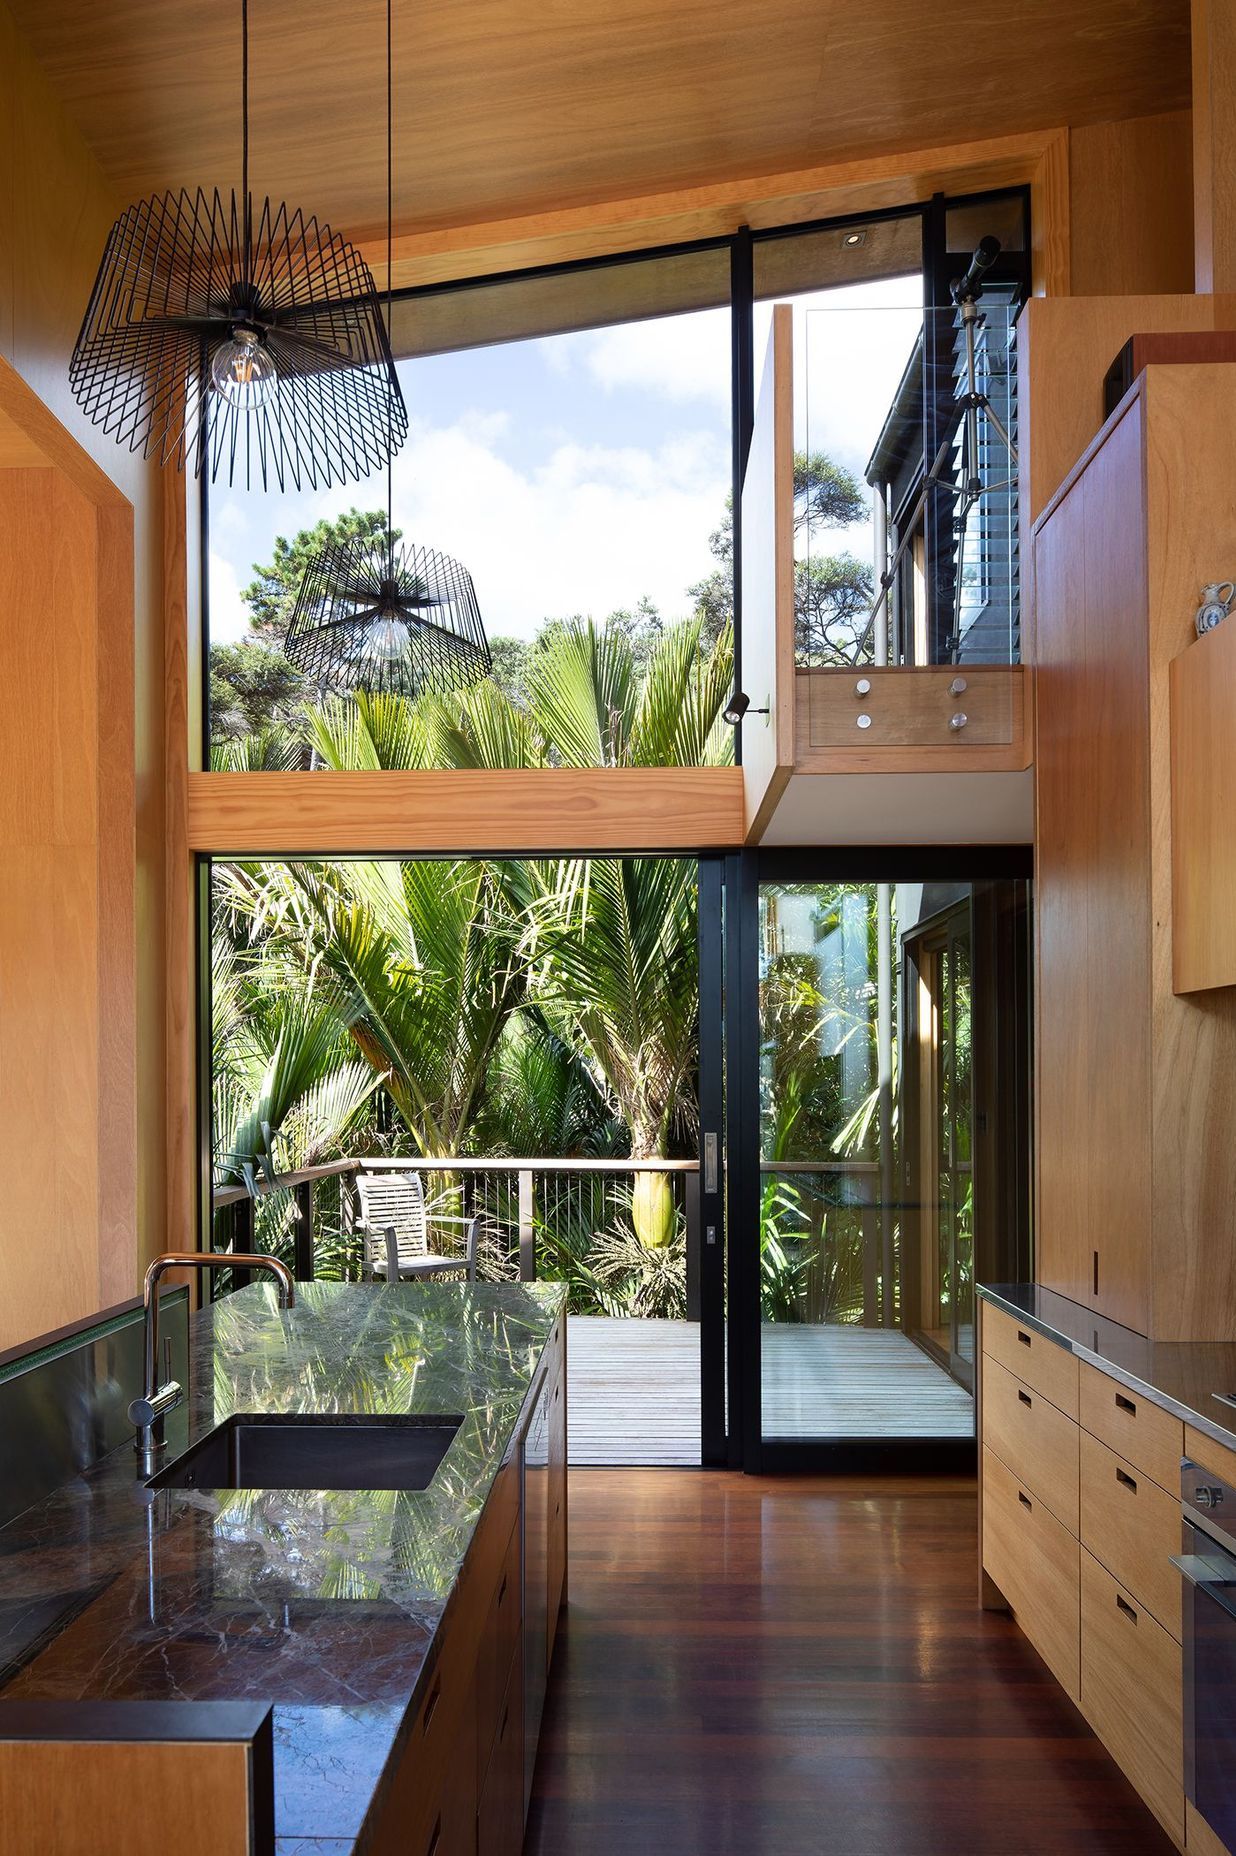 The kitchen opens straight out onto a deck and a cluster of nikau palms.